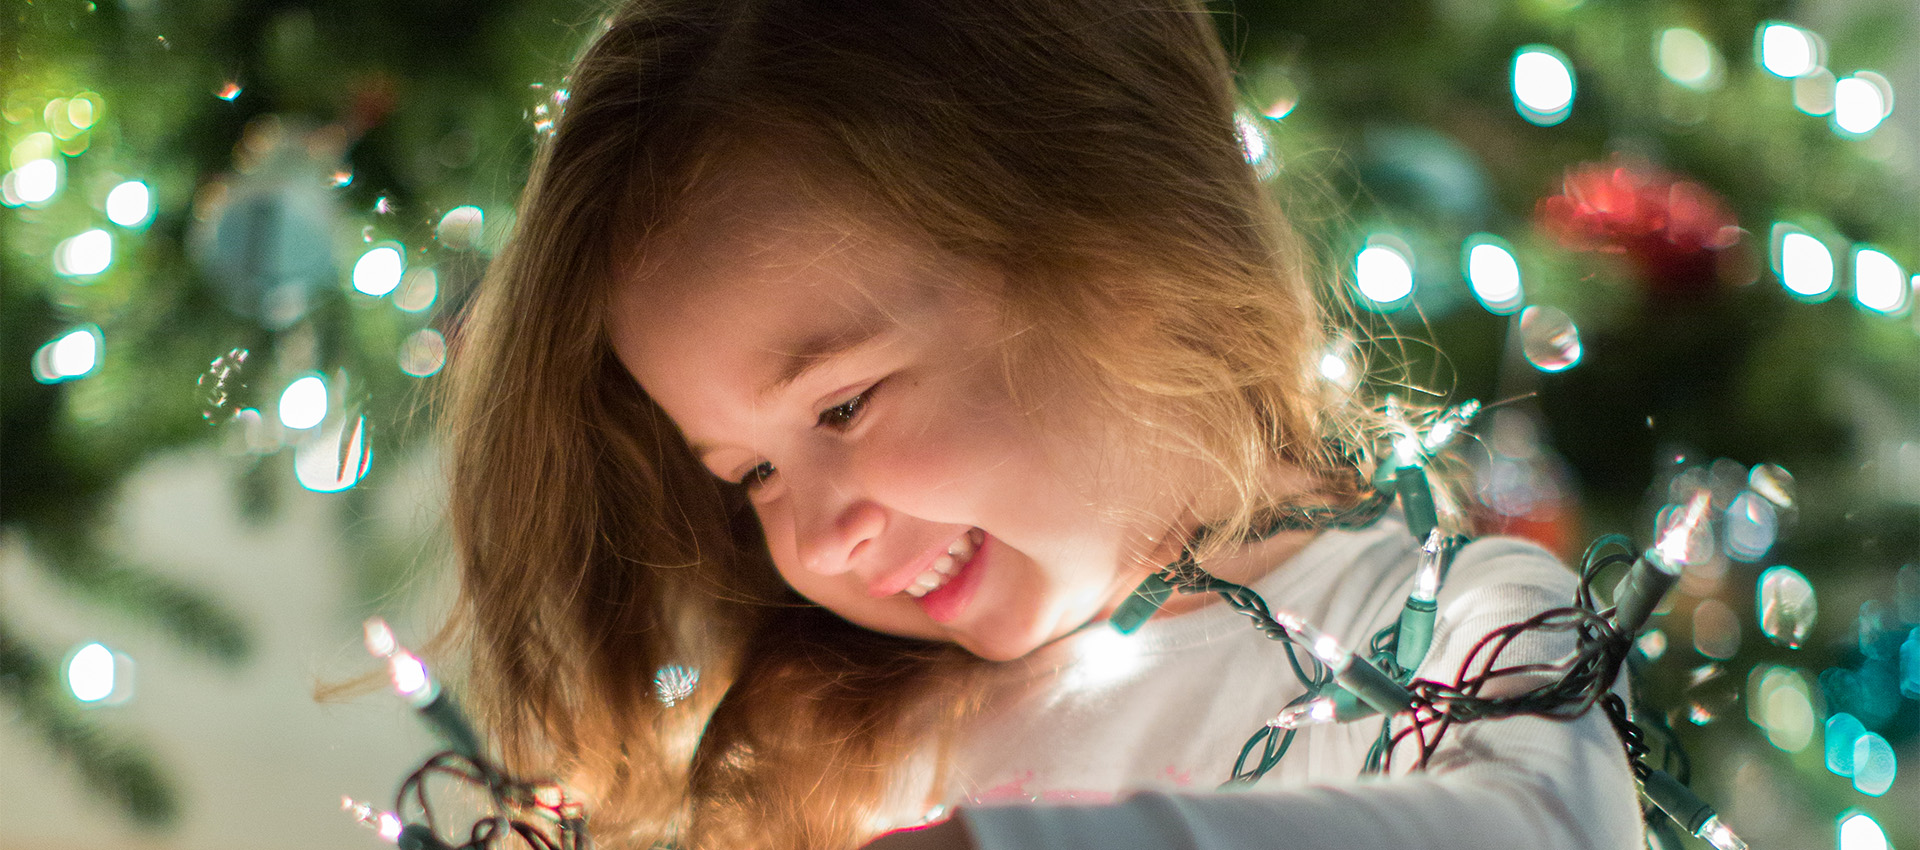 Image of a little girl in front of the Christmas tree